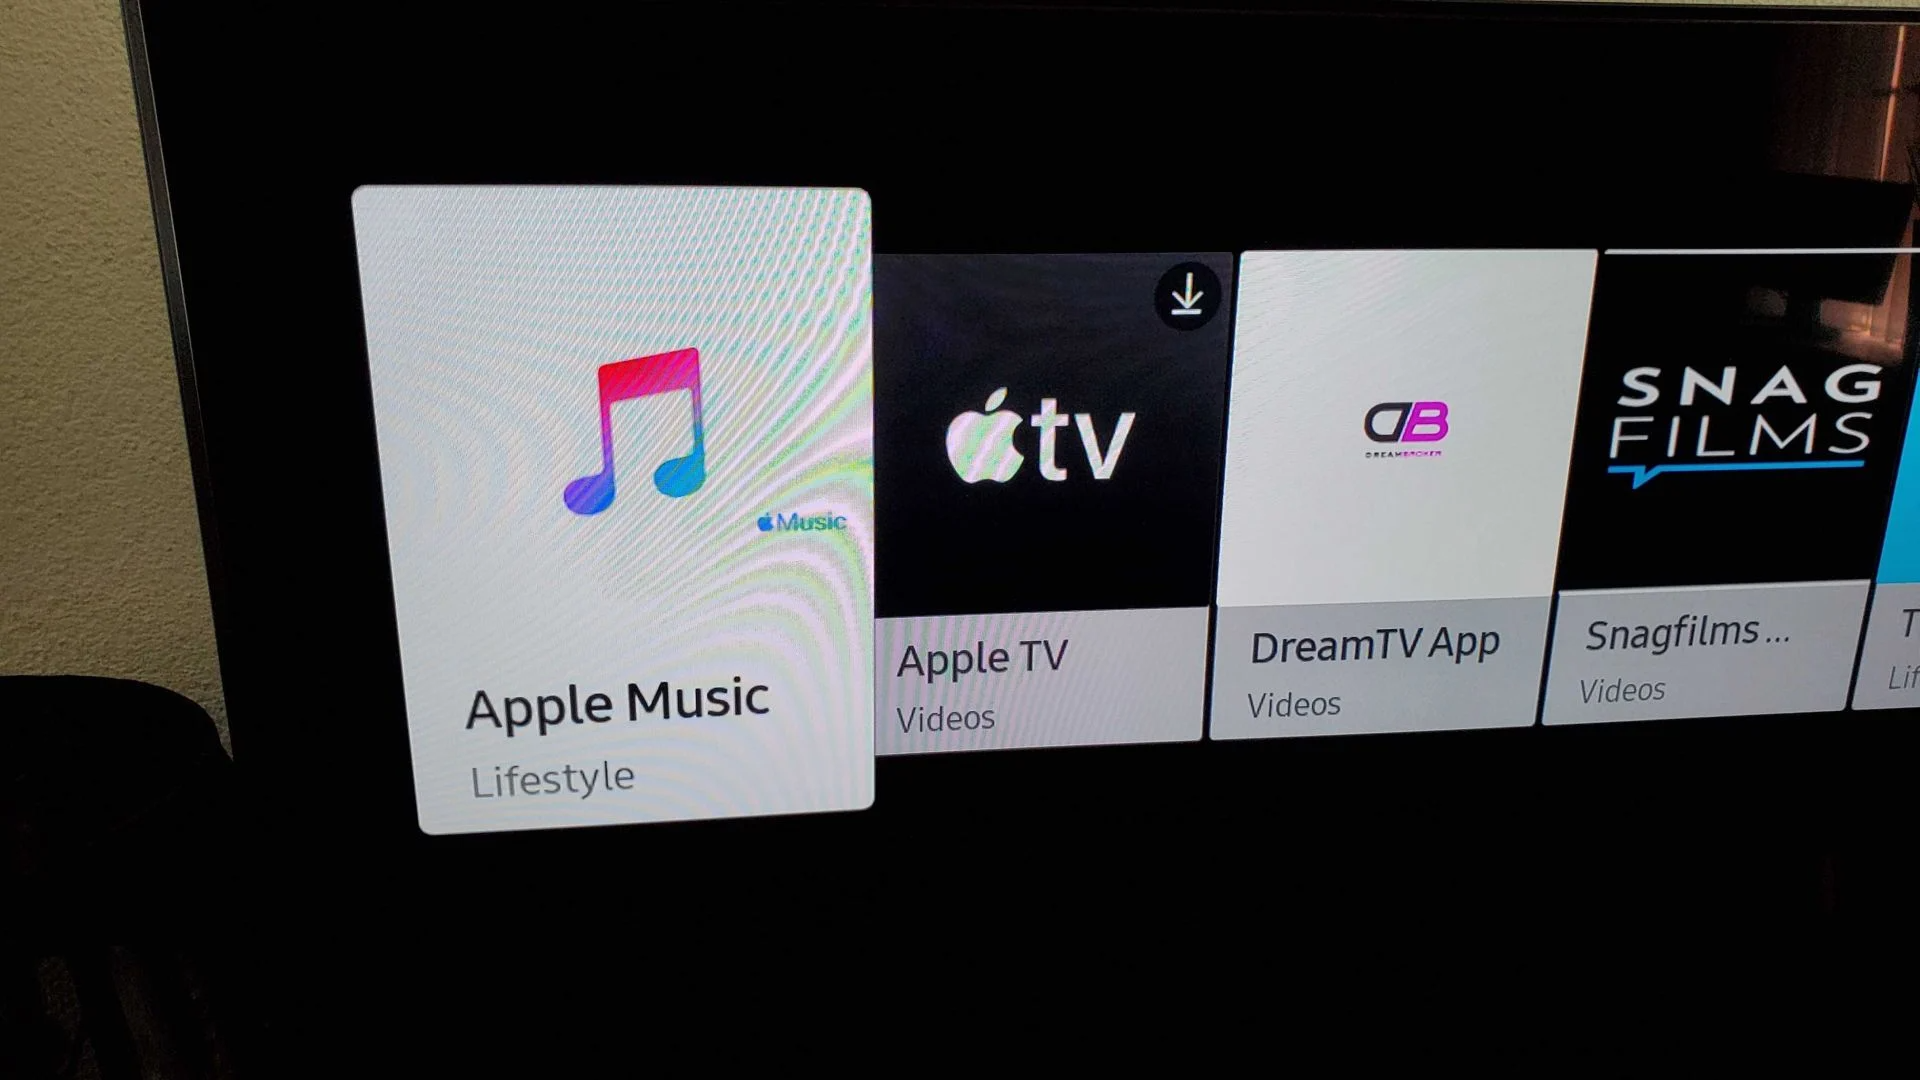 Samsung are the first Smart TVs to now play Apple Music